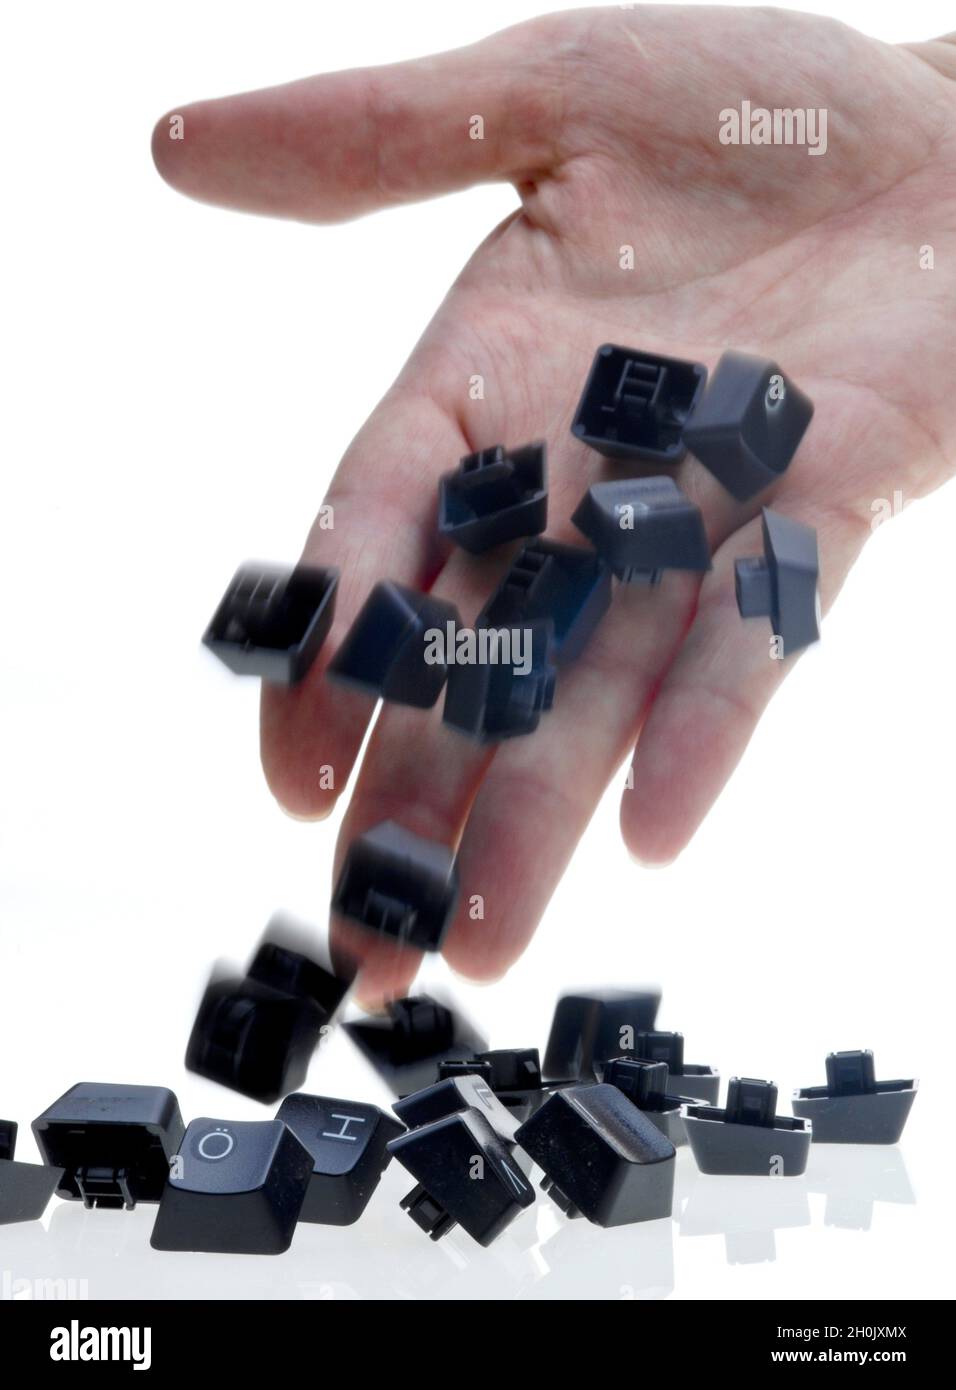 loose keys of a broken keyboard falling out of one hand Stock Photo